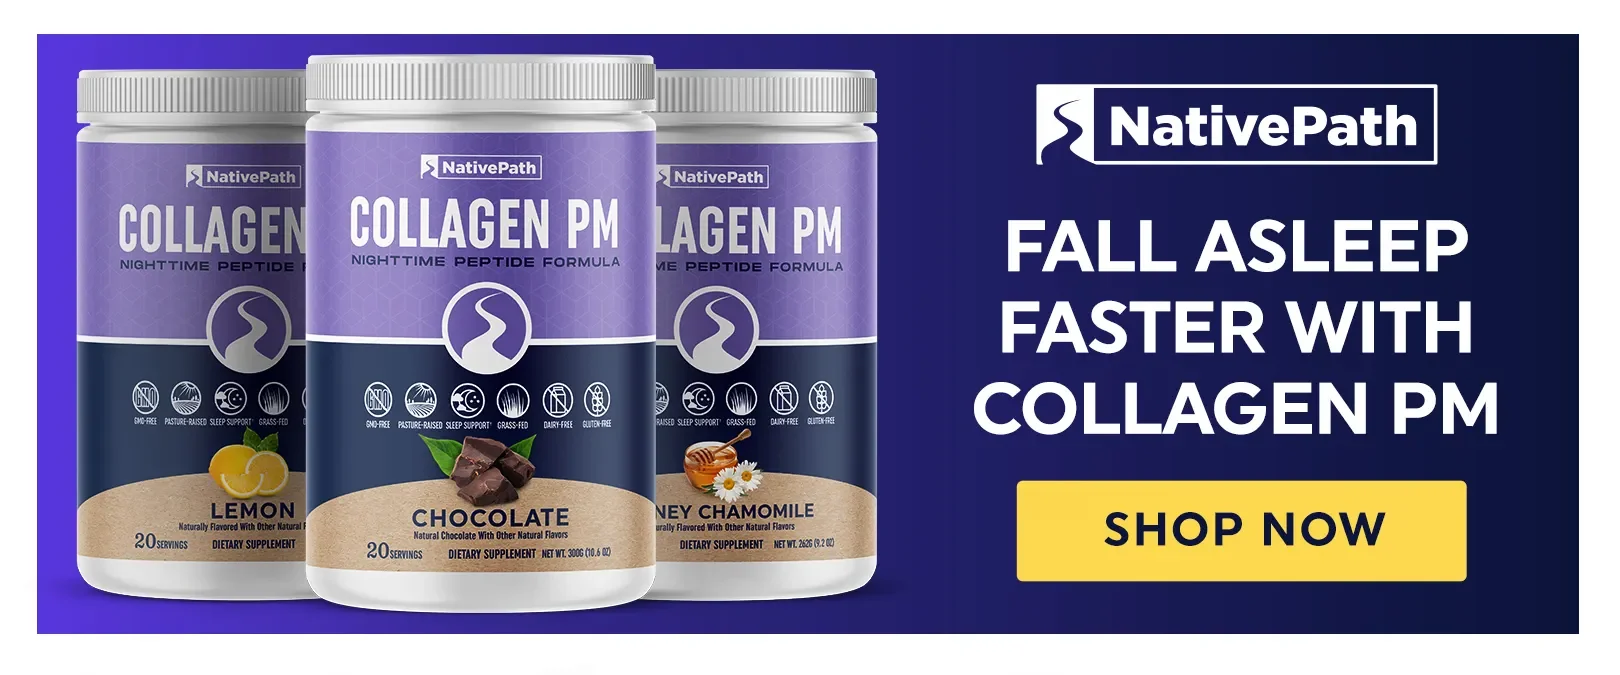 Fall Asleep Faster with Collagen PM